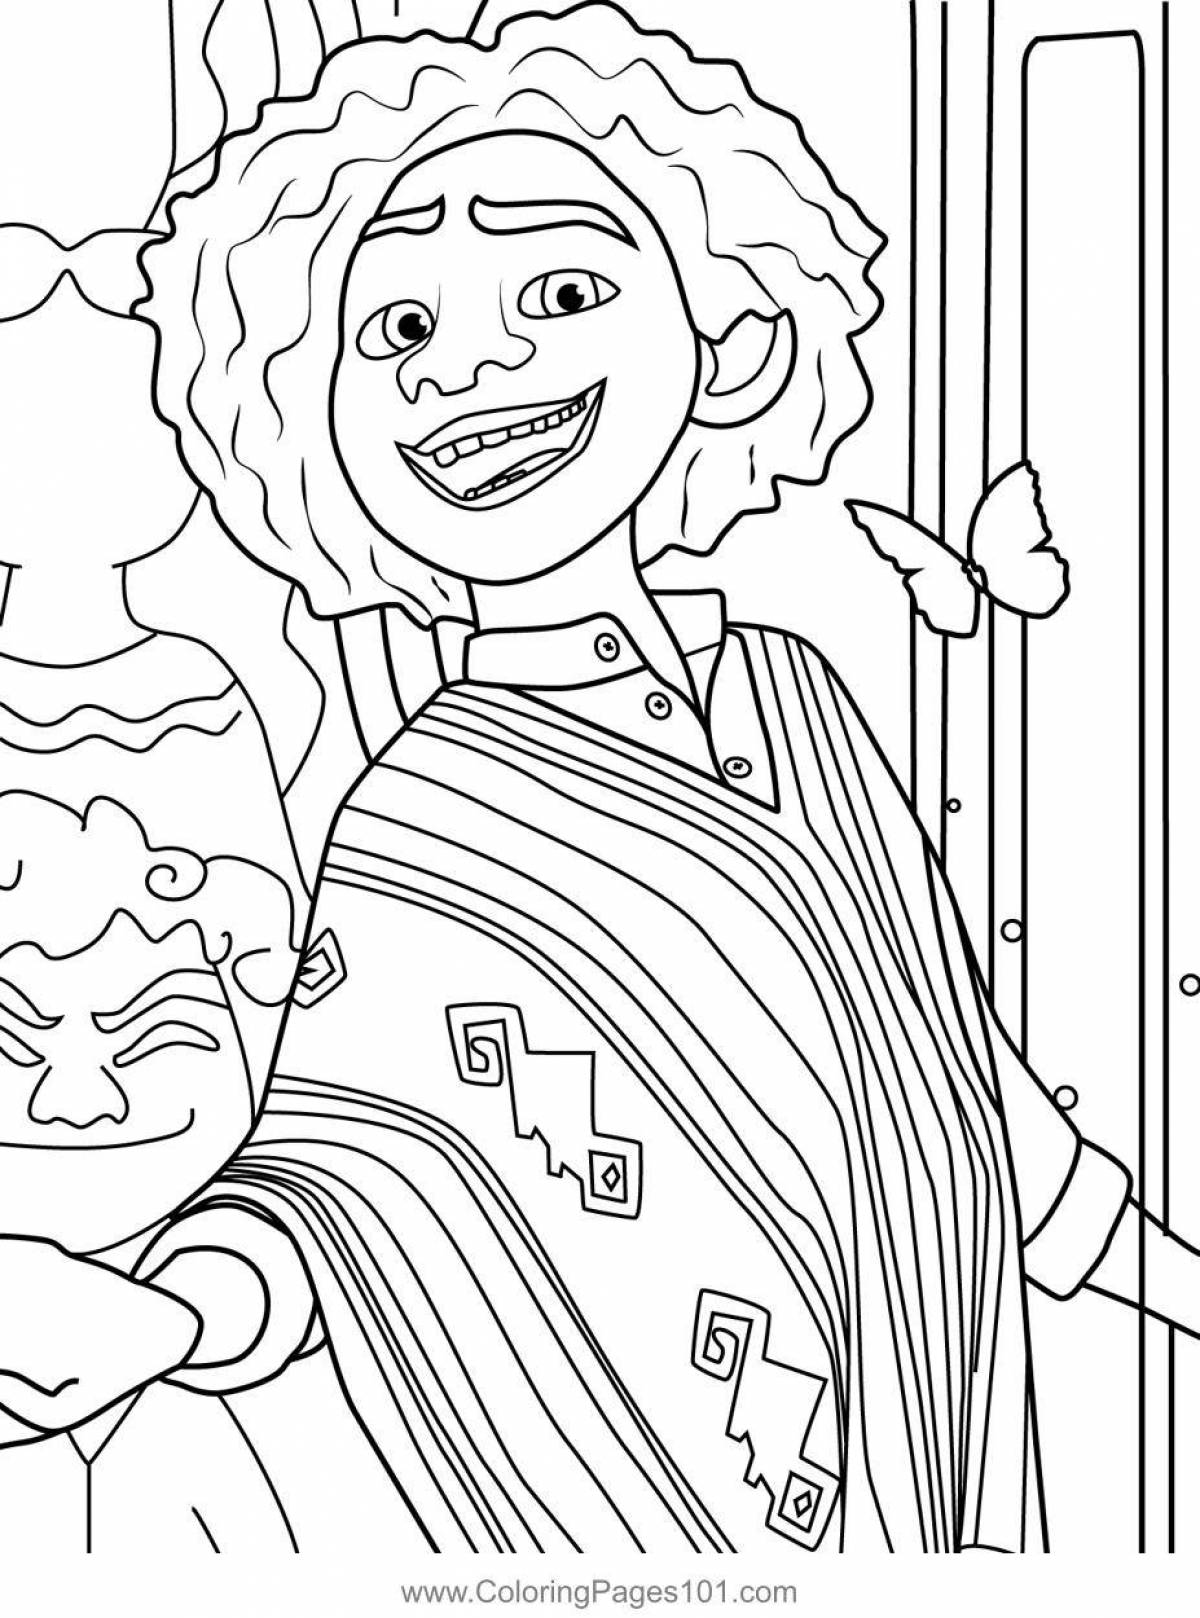 Charming isabelle coloring book